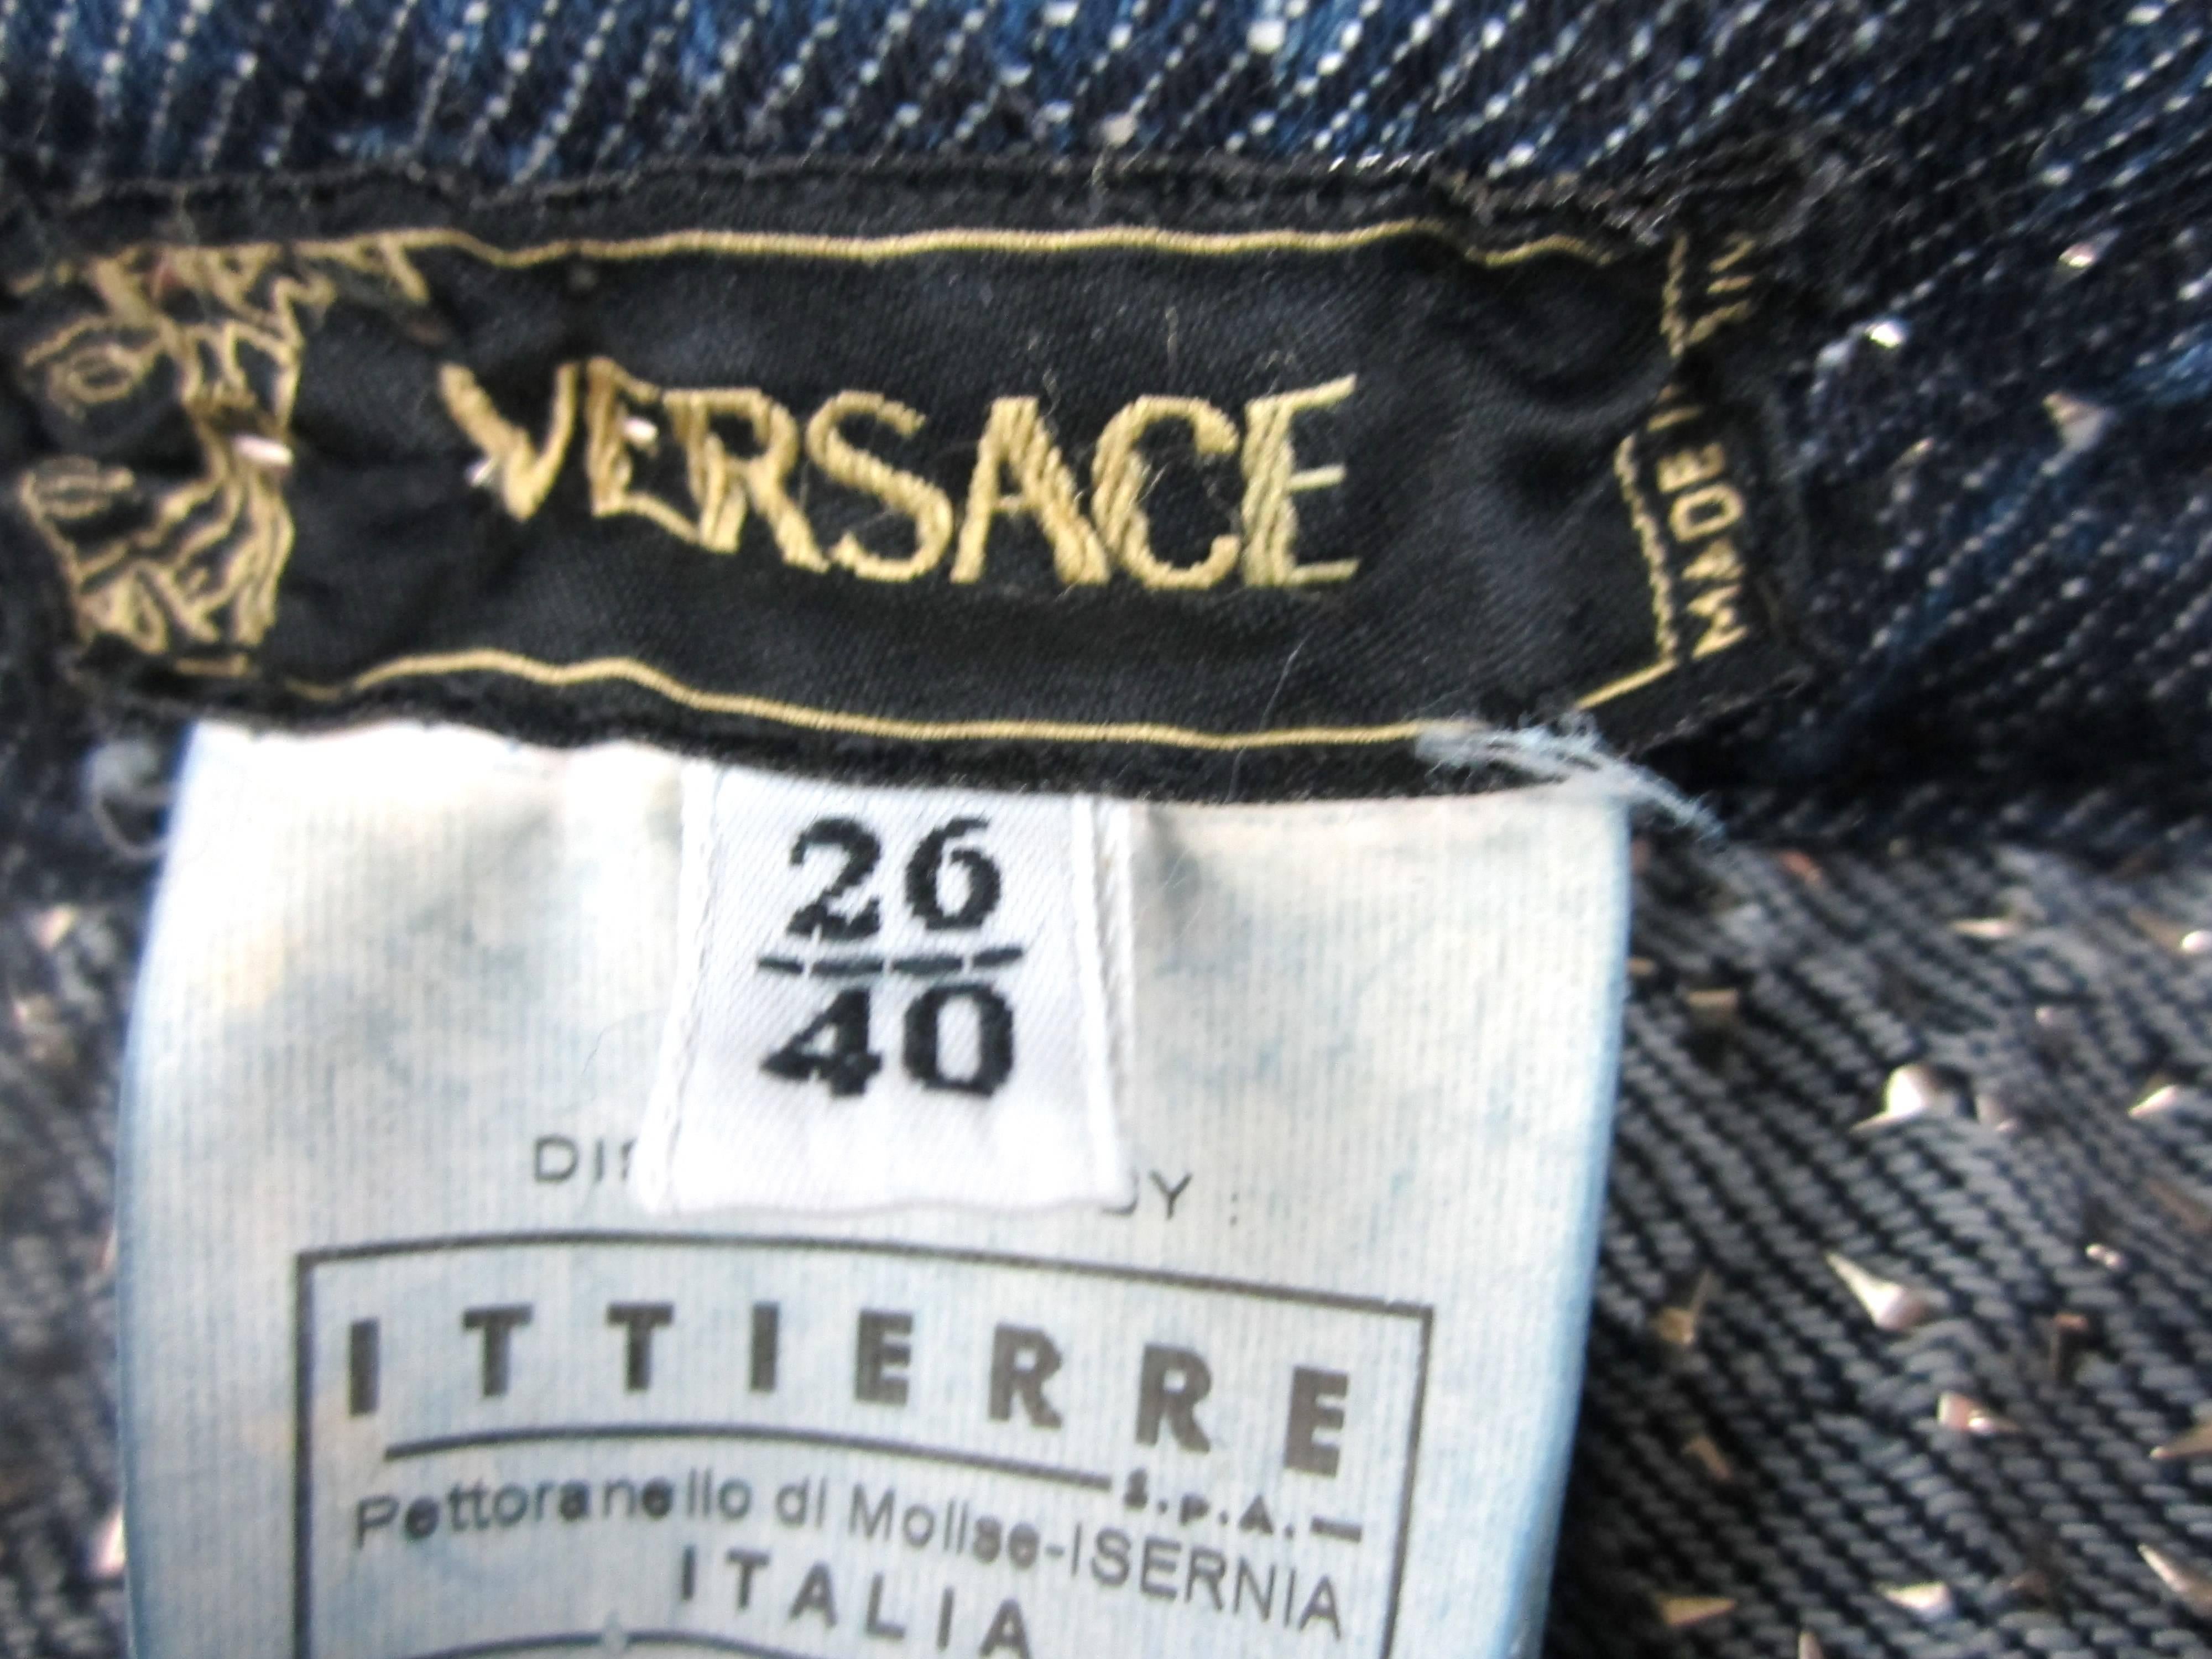  Gianni Versace Skirt Studded Denim Mini 1990s In New Condition For Sale In Wallkill, NY